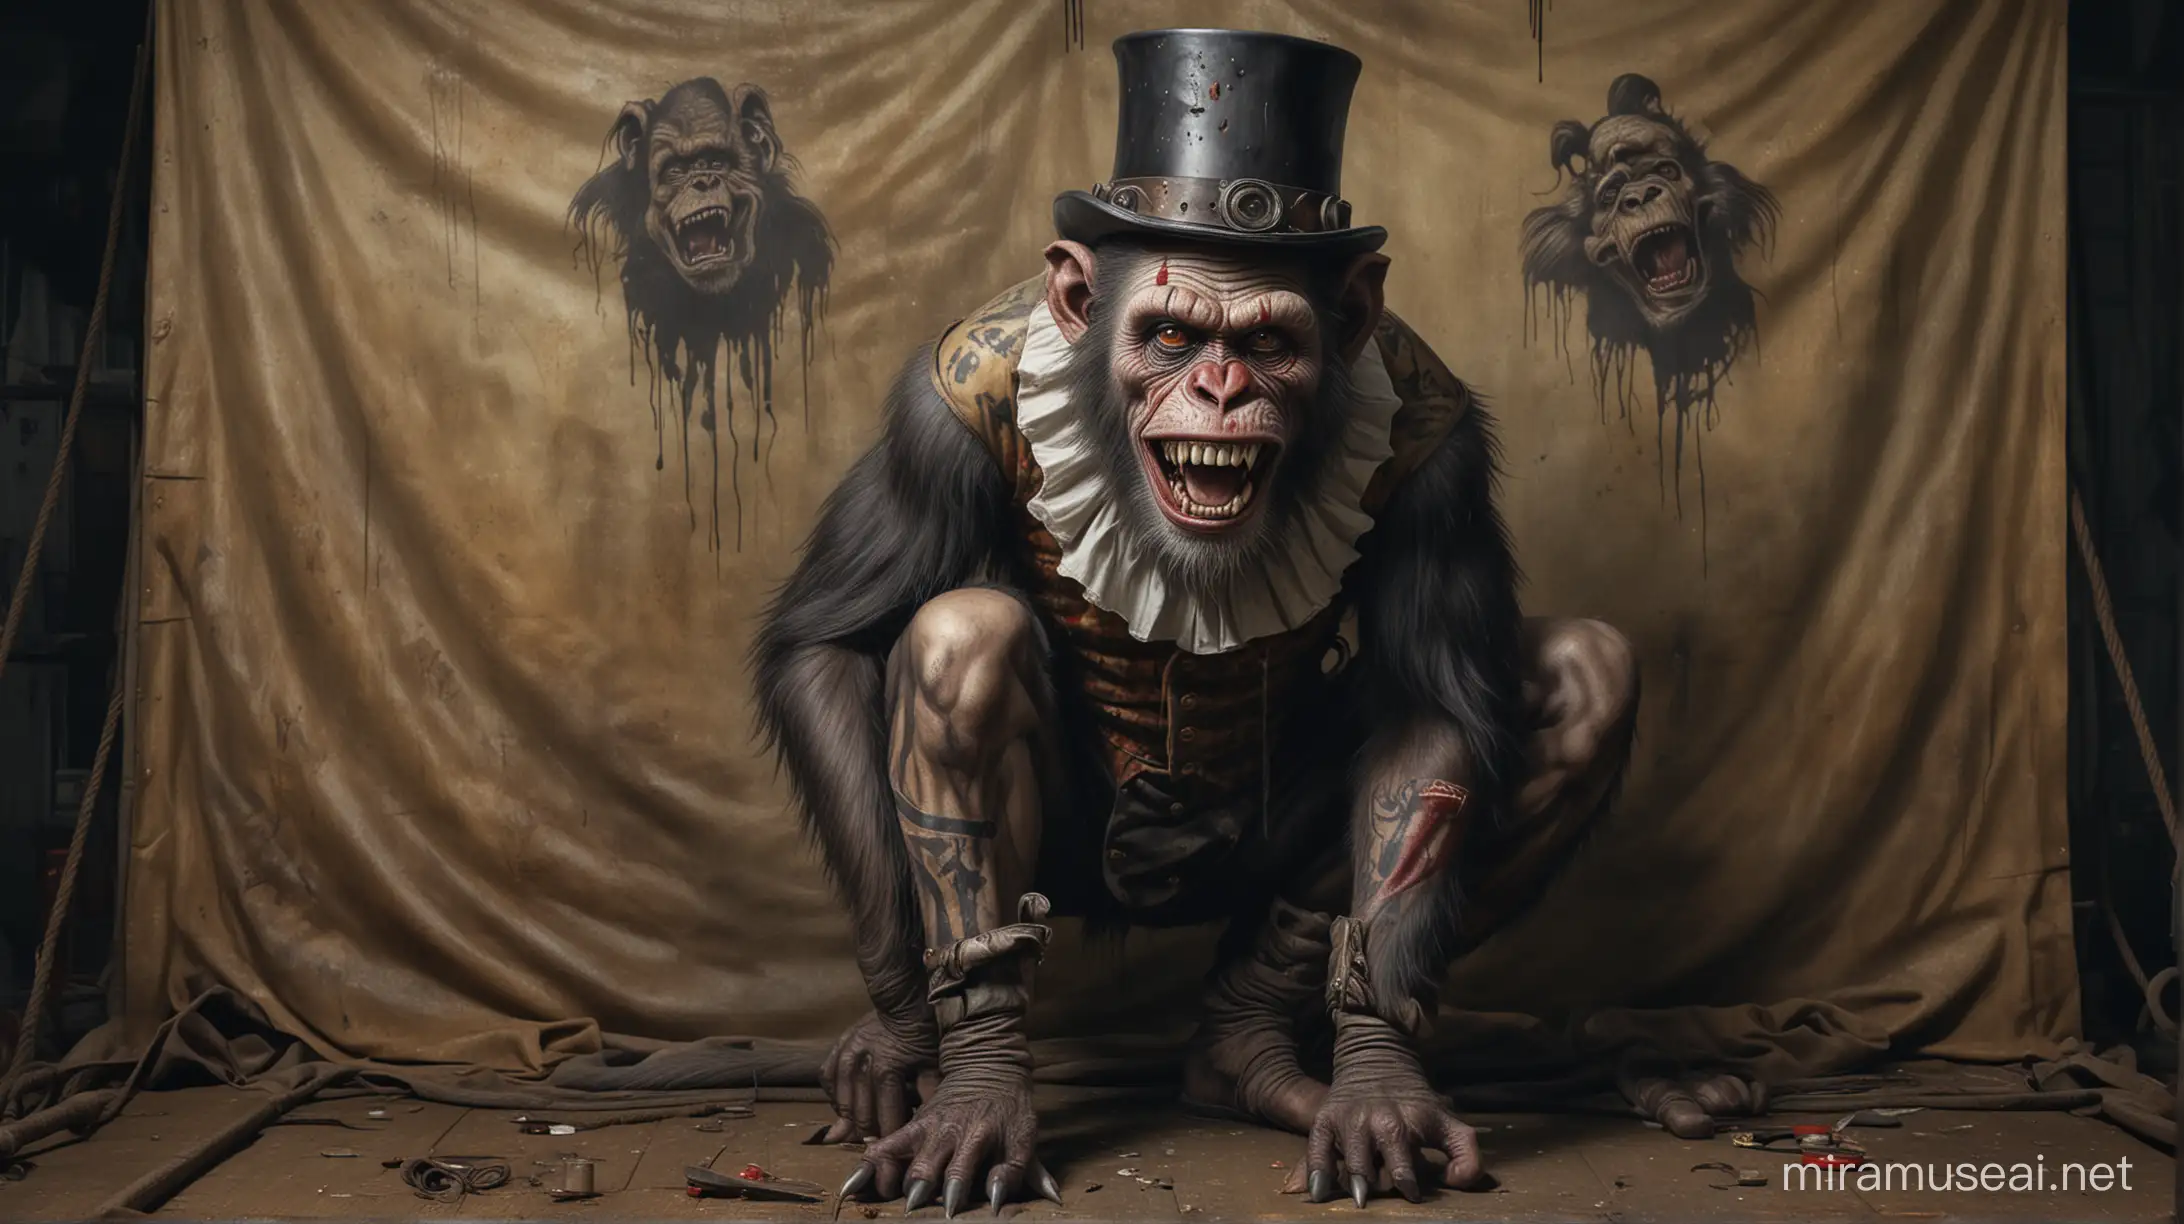 Grotesque Monkey Mechanic in Vintage Circus Tent